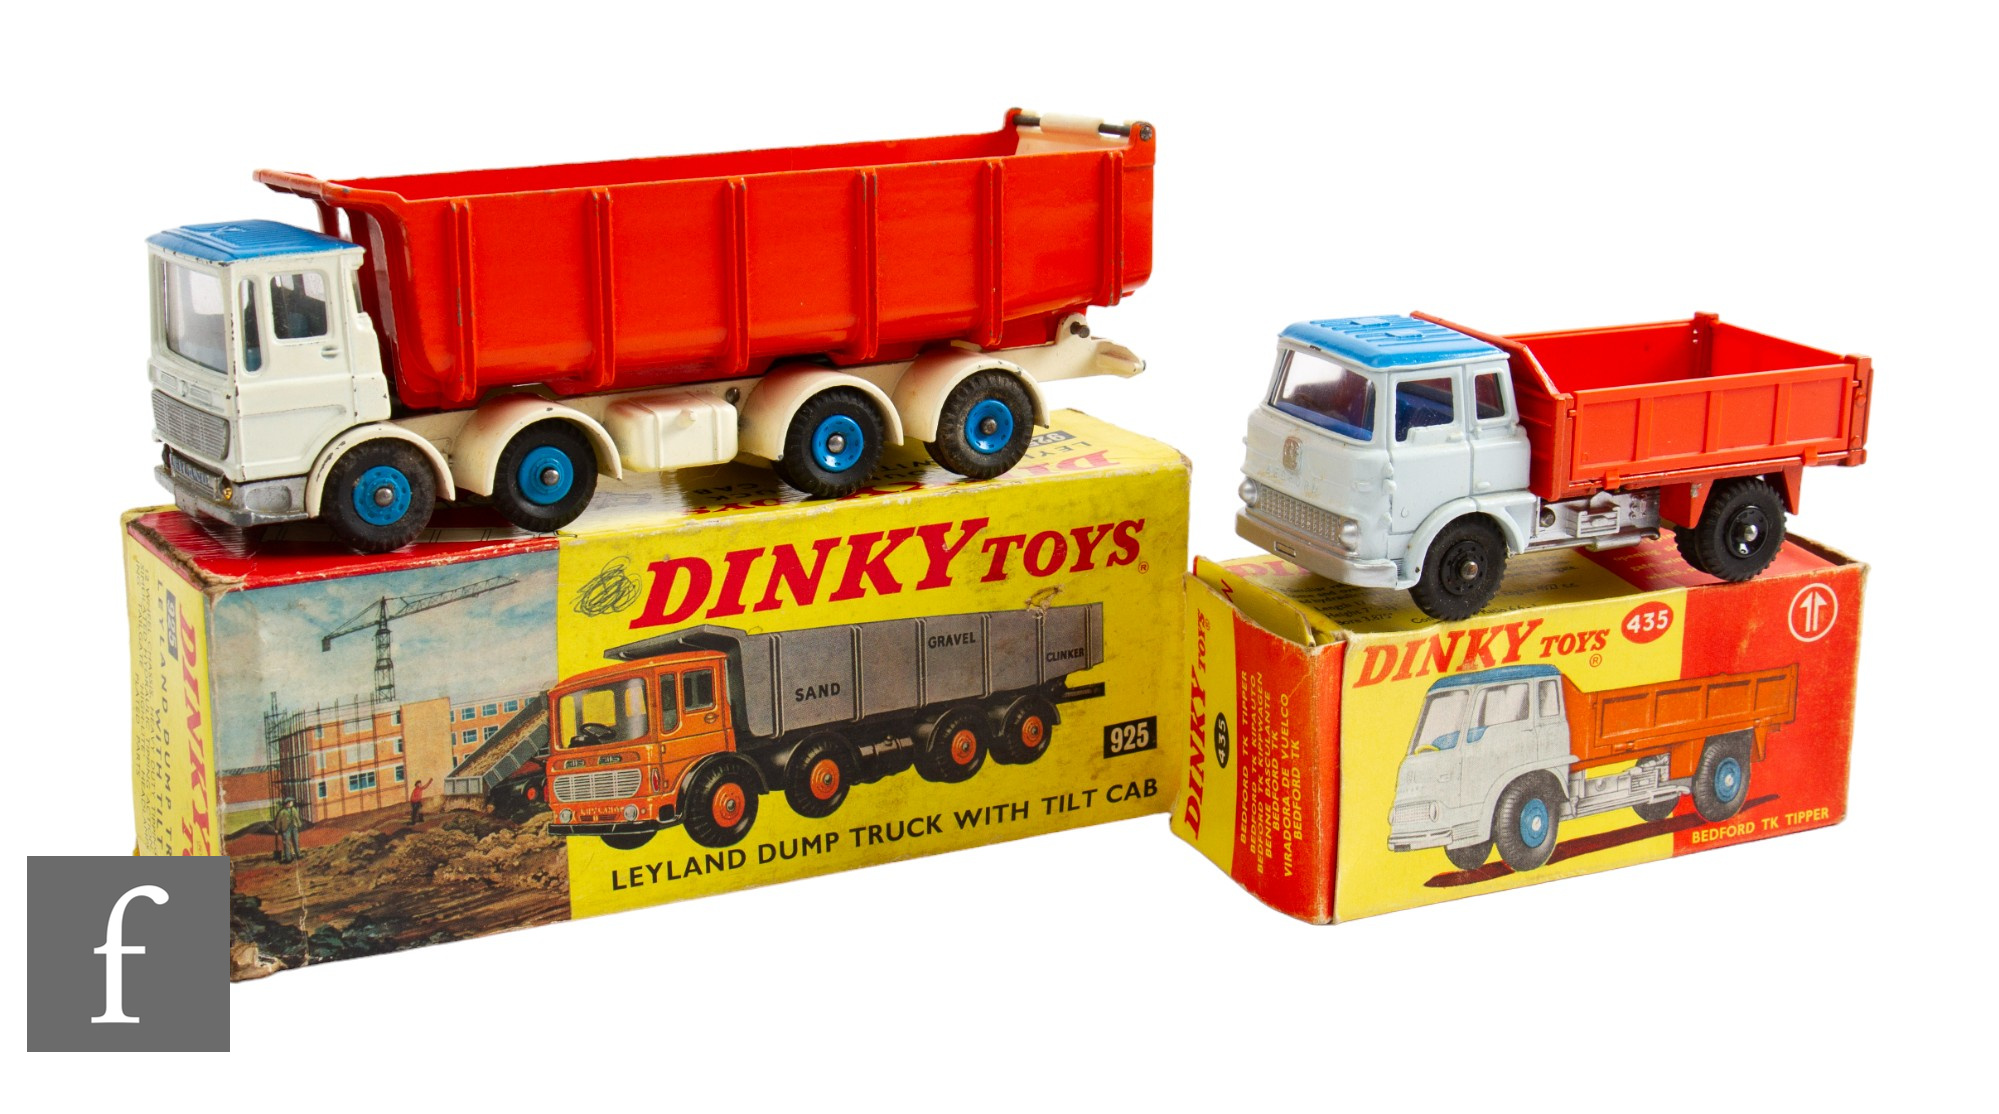 A Dinky 925 Leyland Dump Truck with Tilt Cab, with off white cab and chassis, blue cab roof, blue